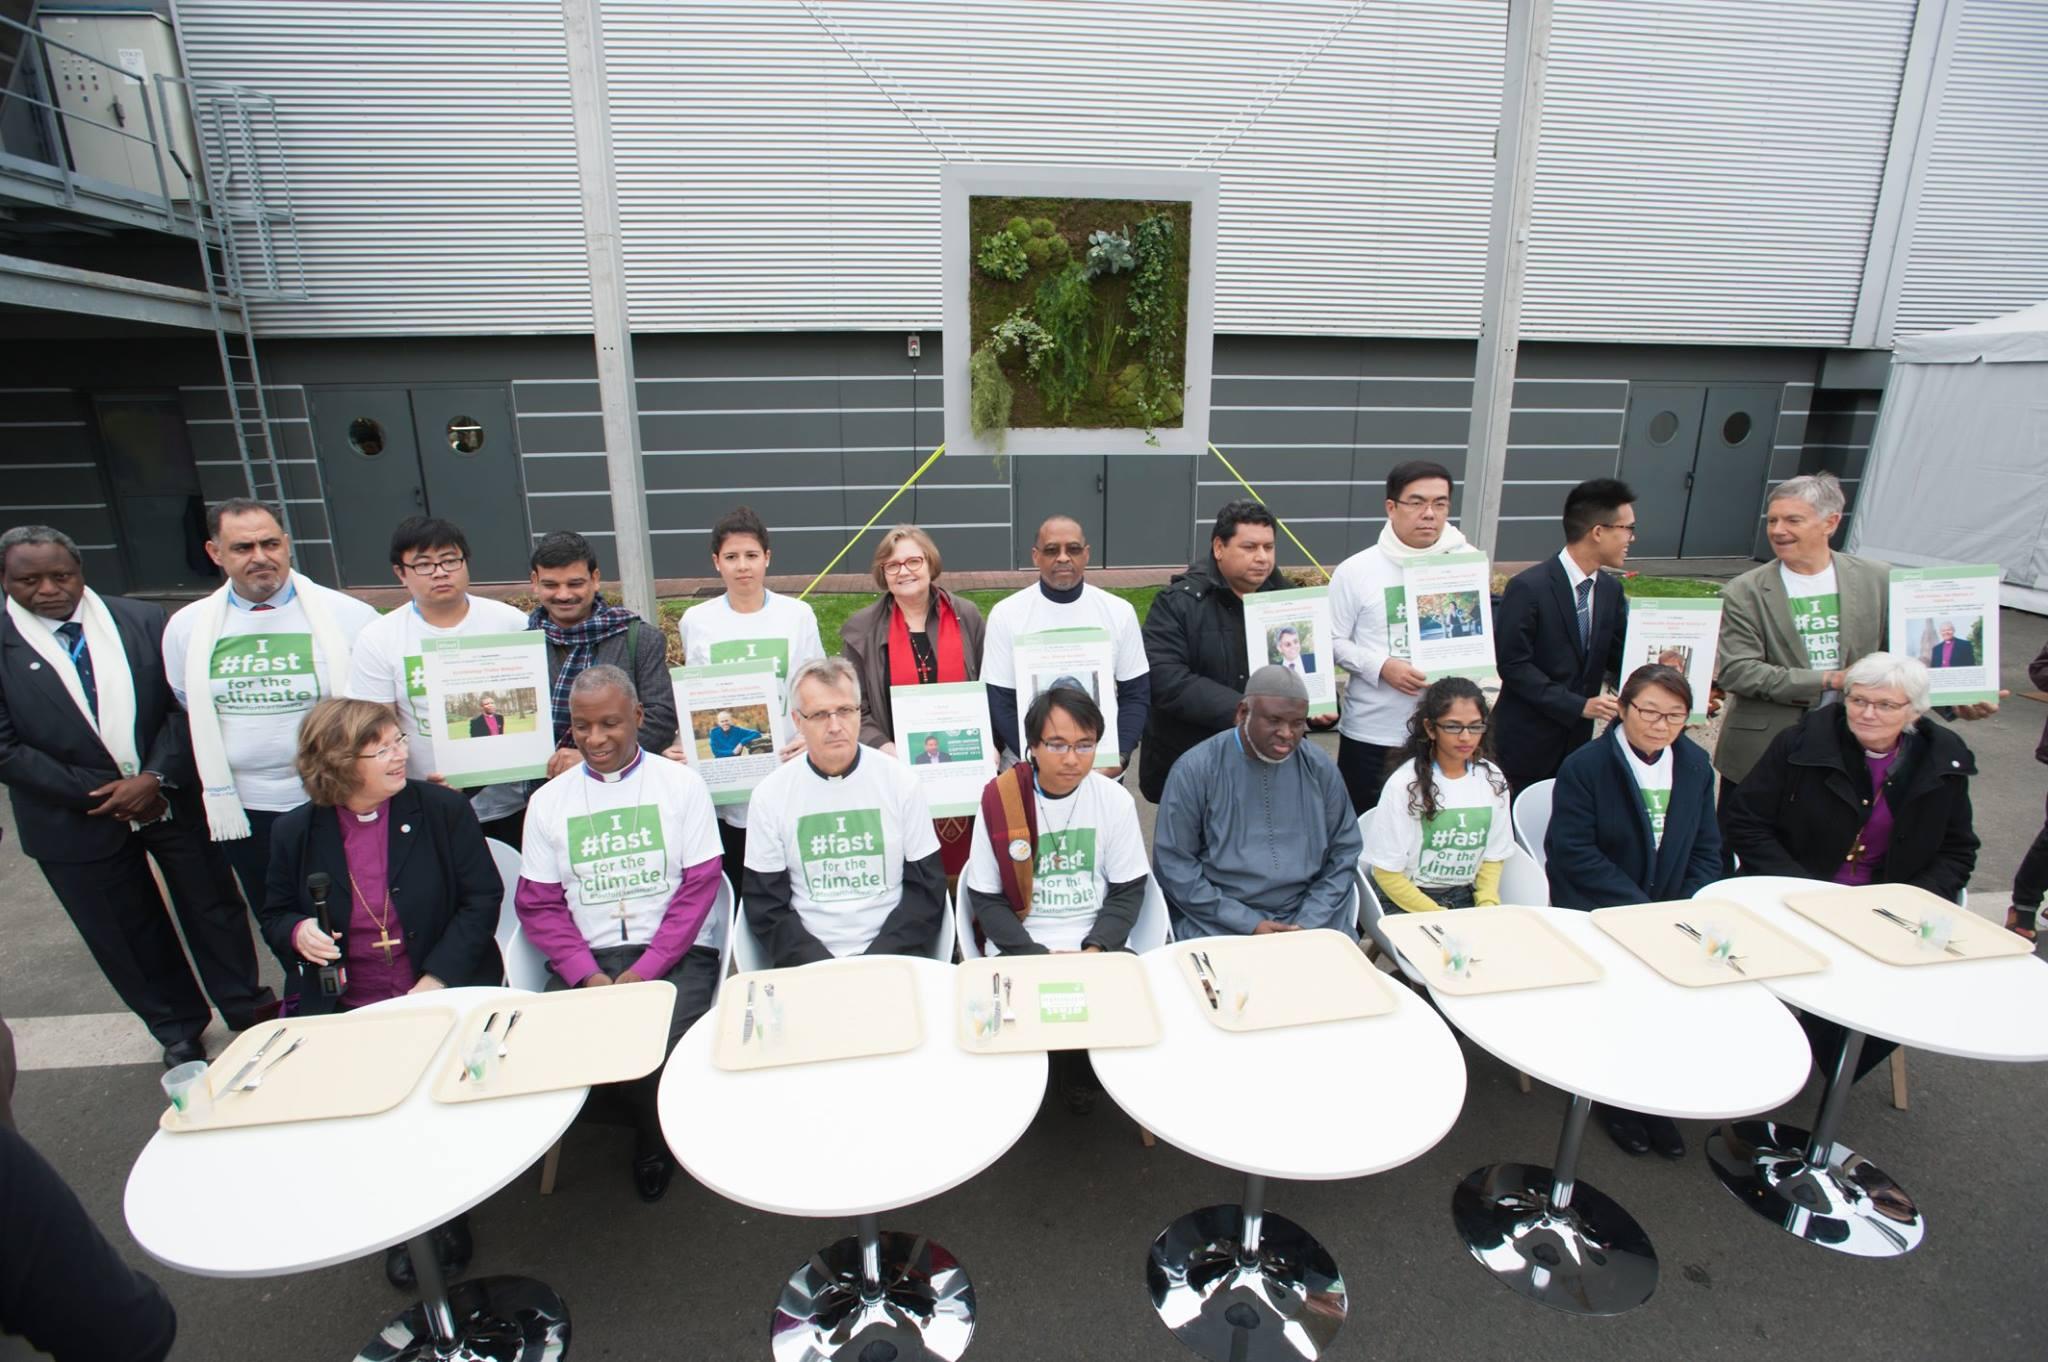 An interfaith group of religious leaders sits in front of empty trays during a public action promoting the Fast for the Climate campaign during the COP21 UN climate summit in Paris, France. Photo: LWF/R. Rodrick Beiler